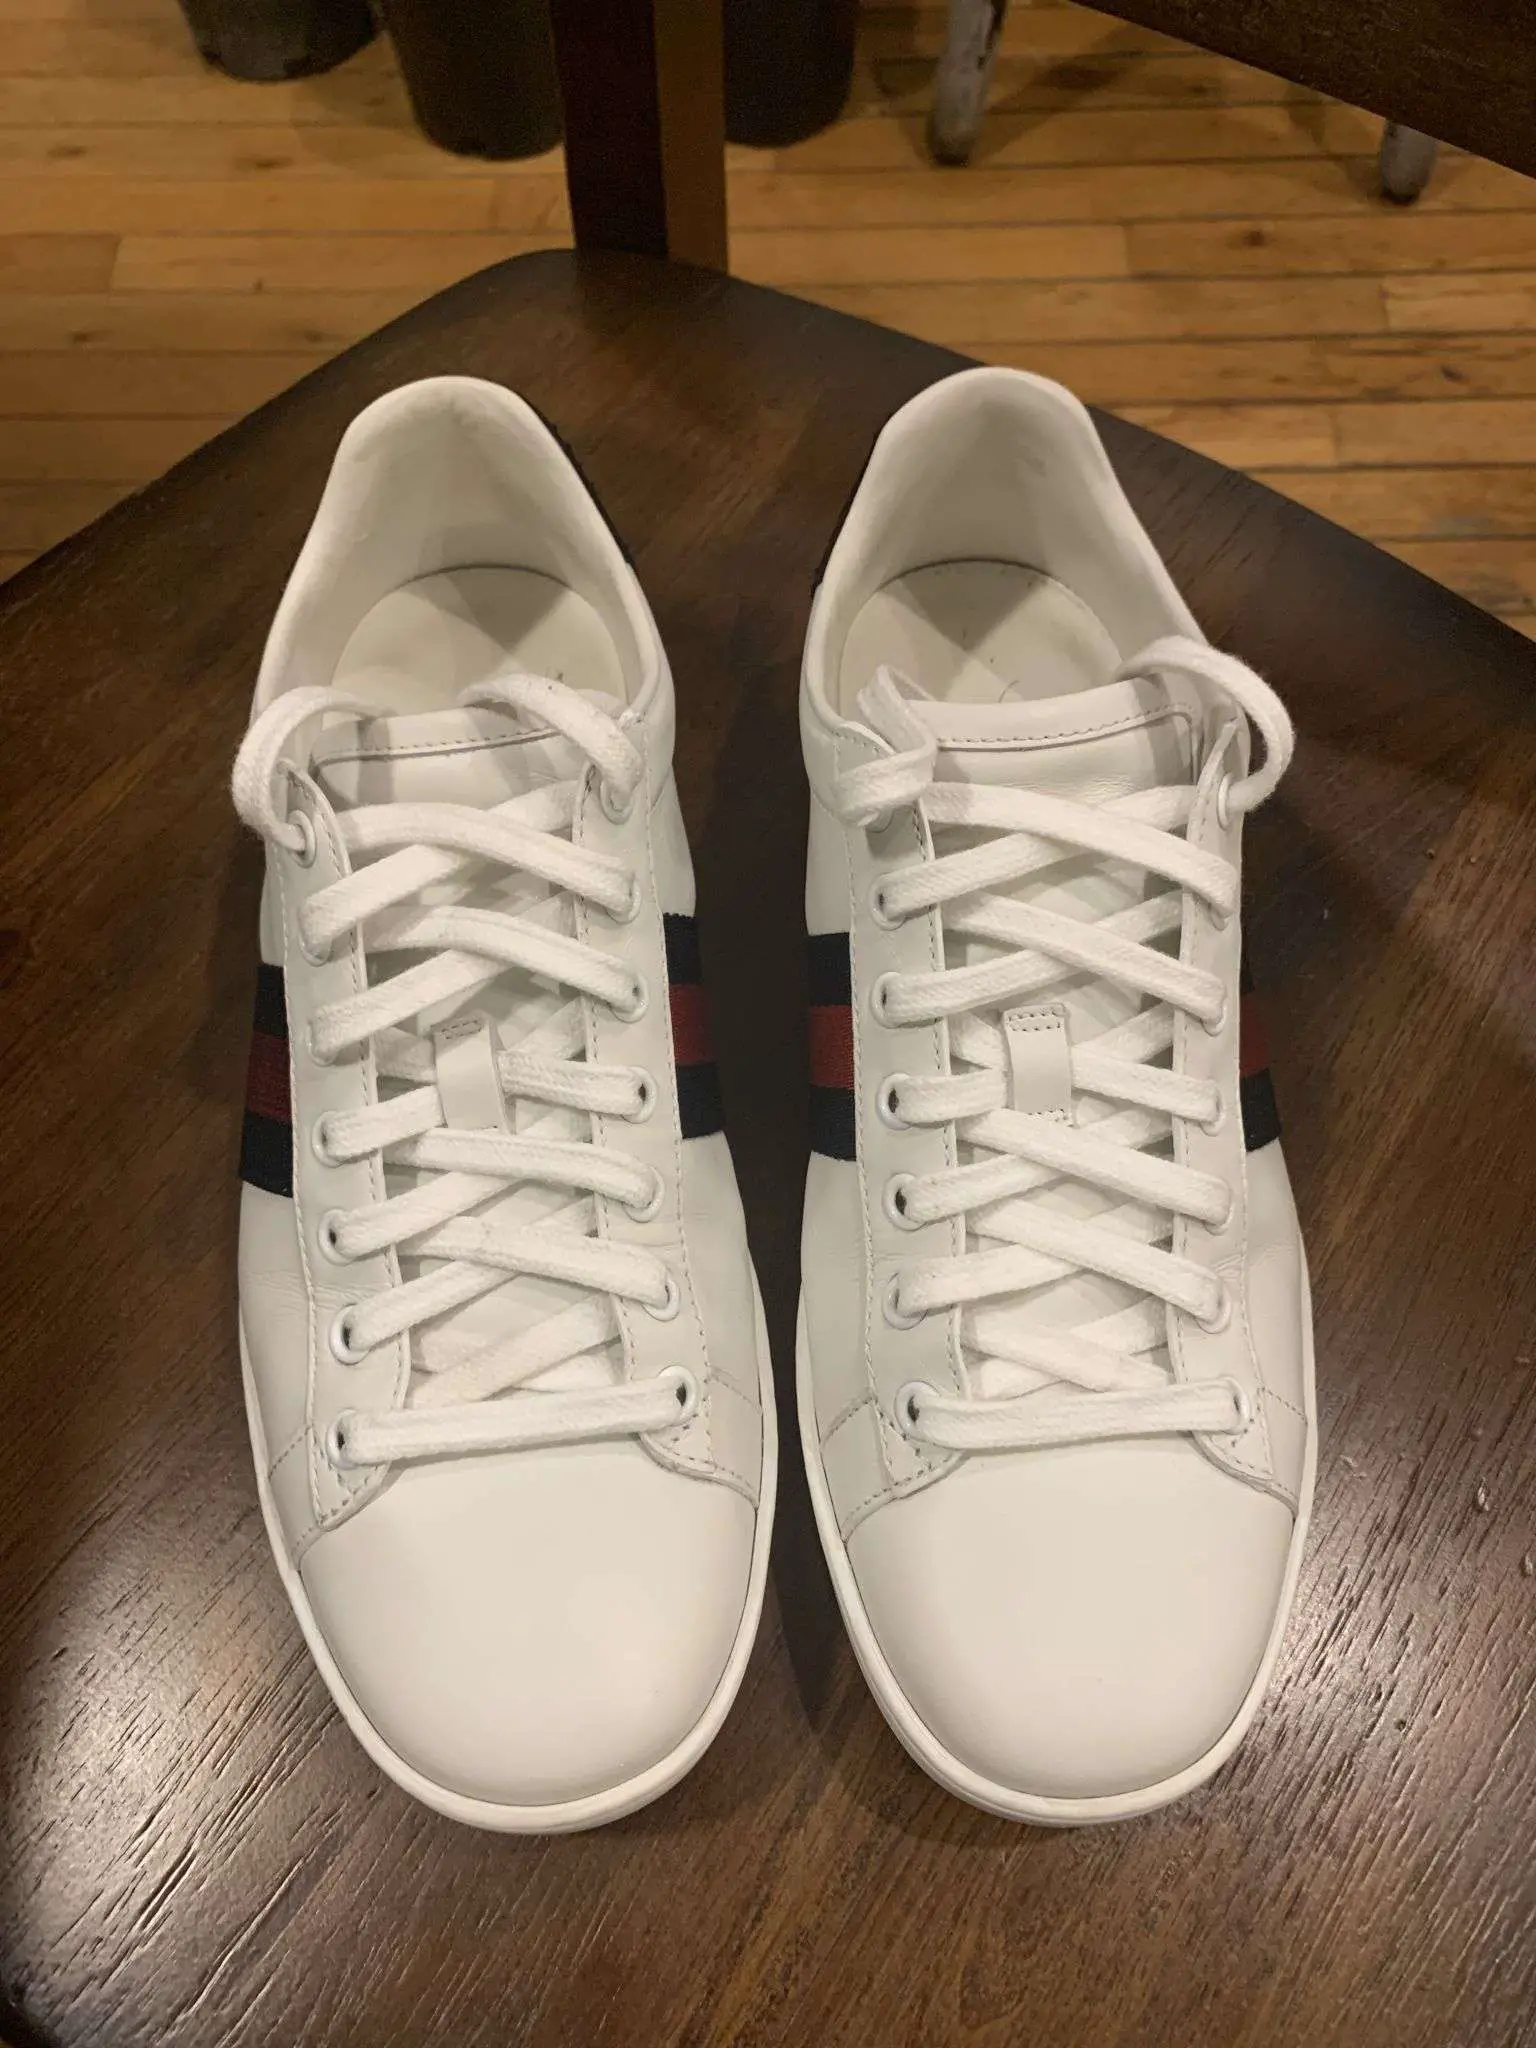 Review Of Gucci Ace Sneakers And How To Keep Them Clean ...